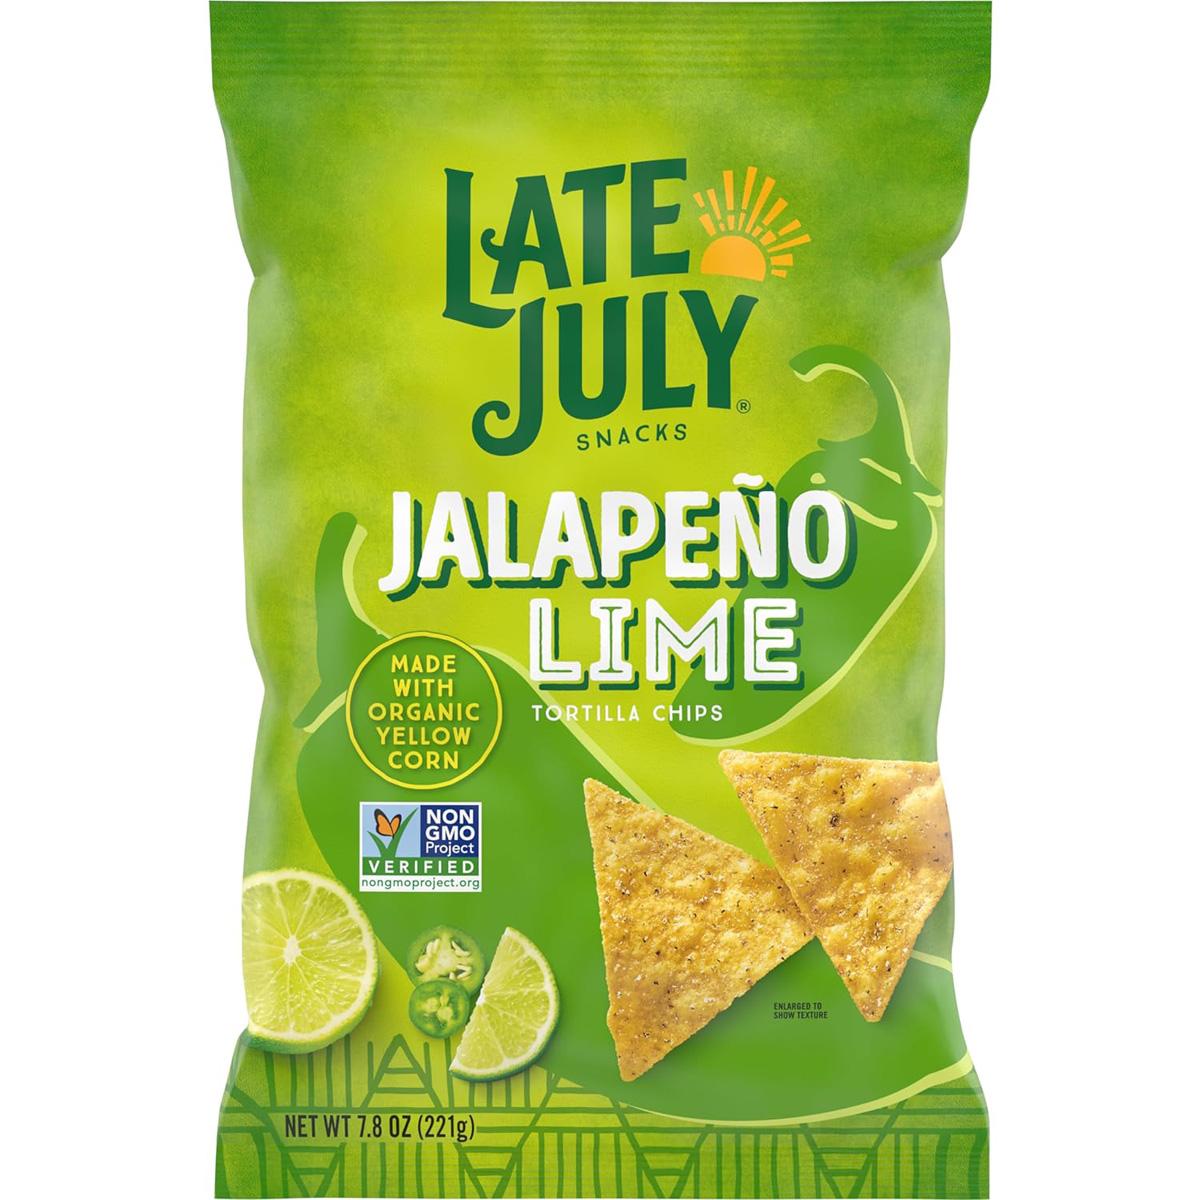 Late July Snacks Jalapeno Lime Tortilla Chips for $2.75